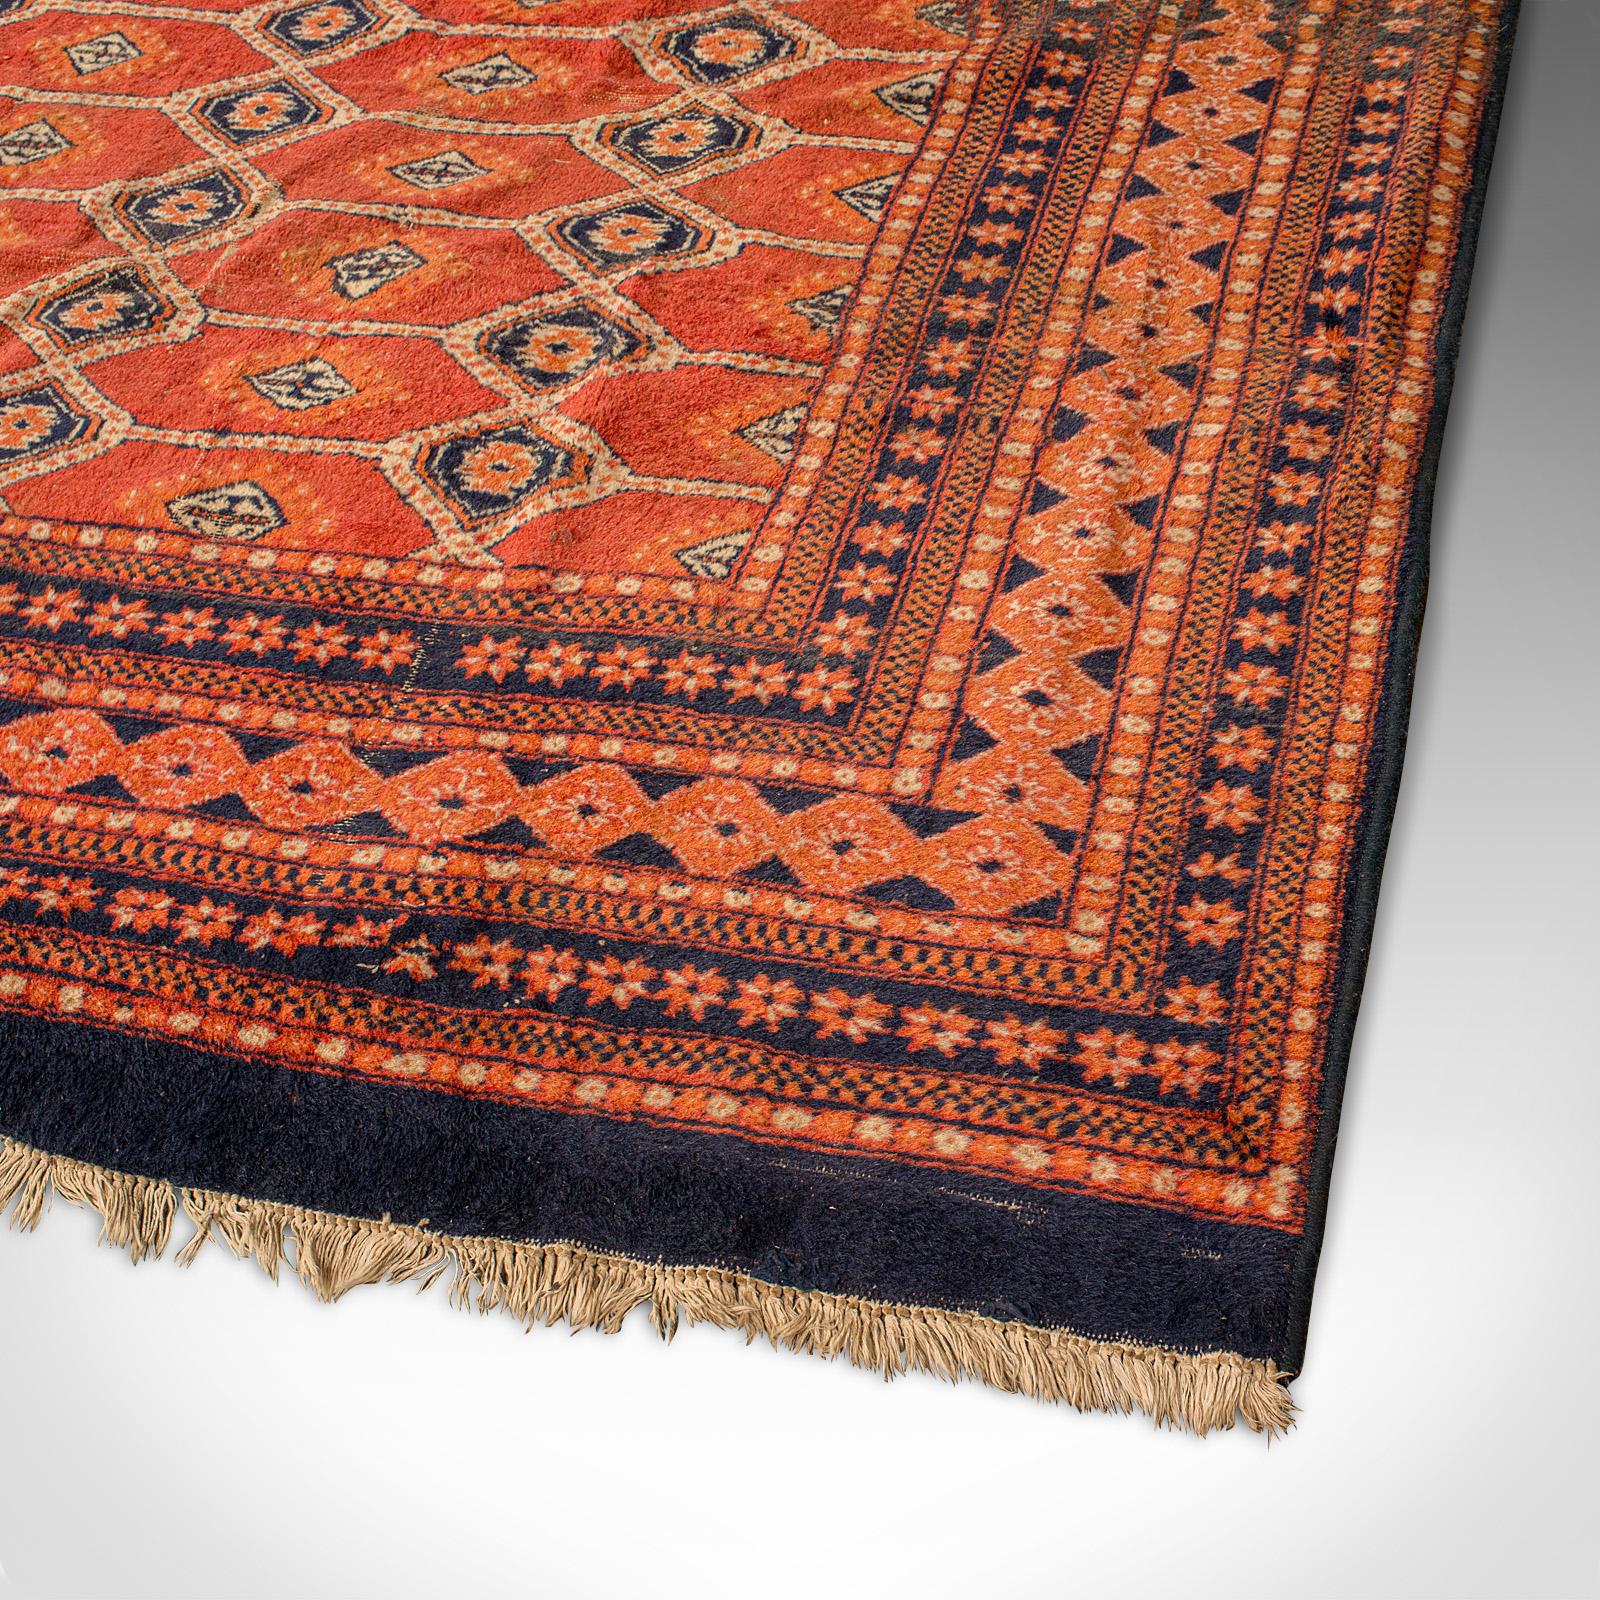 20th Century Large 10' Vintage Bokhara Rug, Middle Eastern, Woven, Hall, Living Room Carpet For Sale